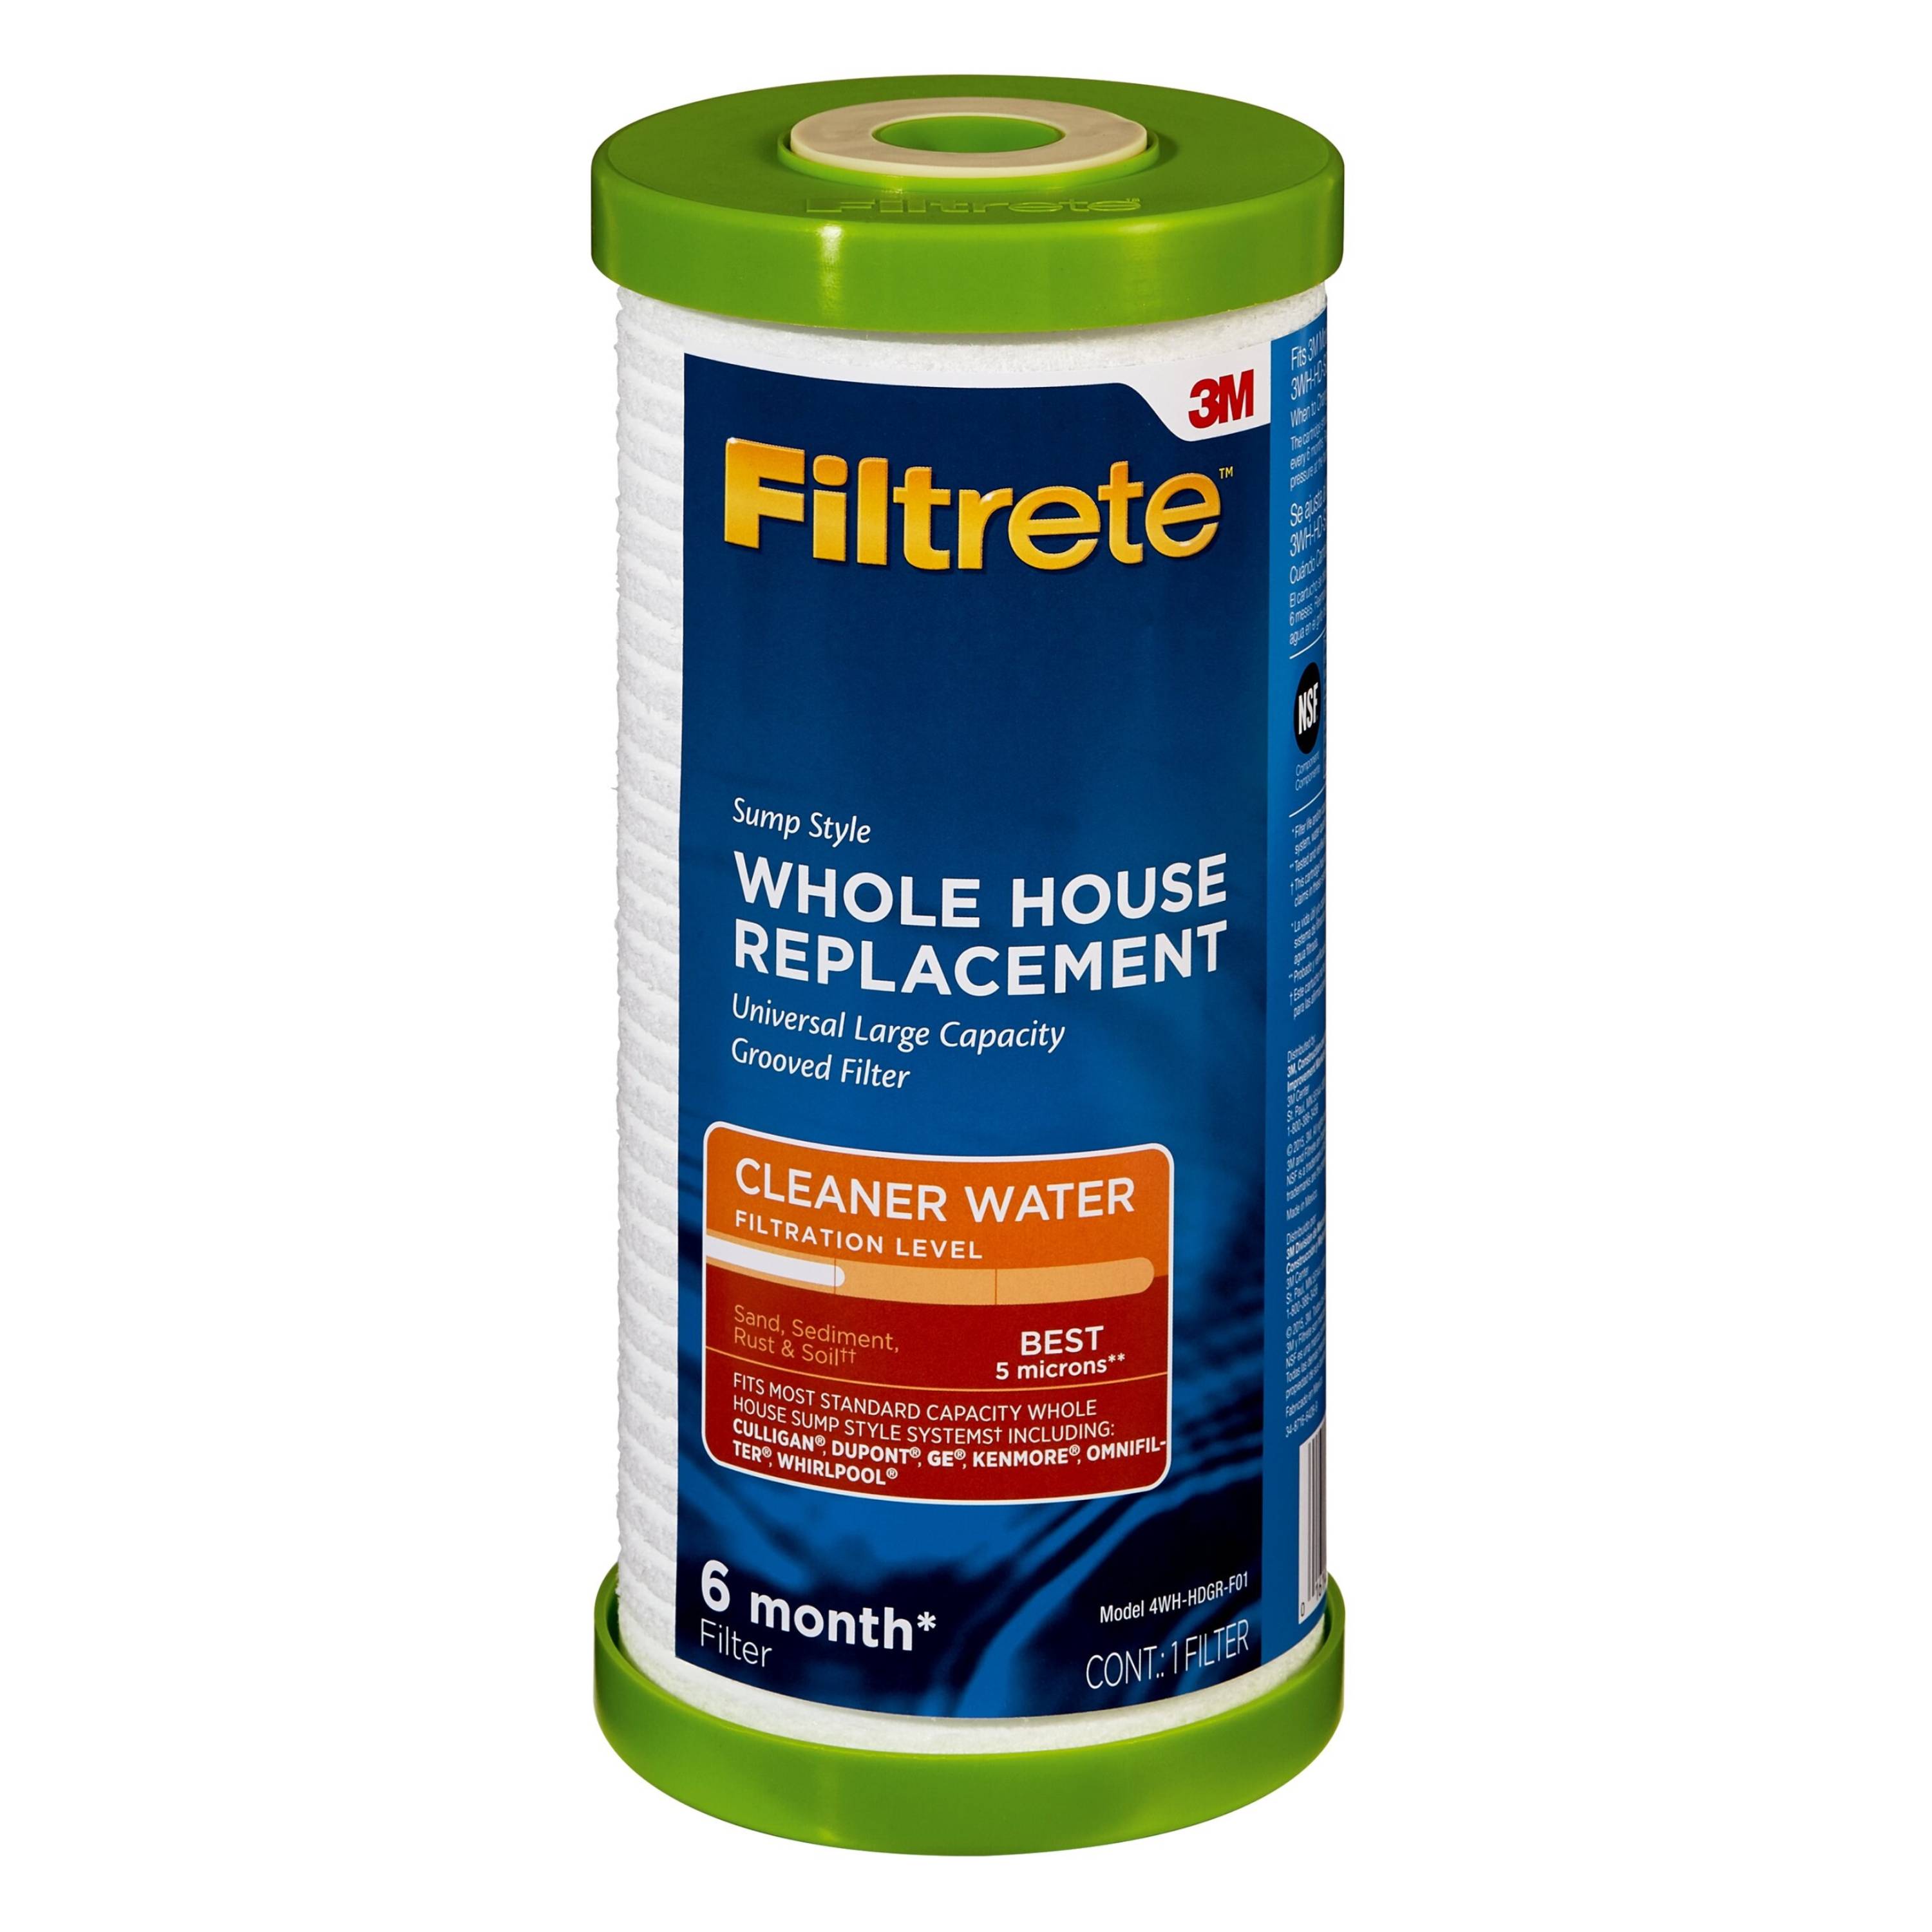 Filtrete Large Capacity 5 Micron Grooved Filter